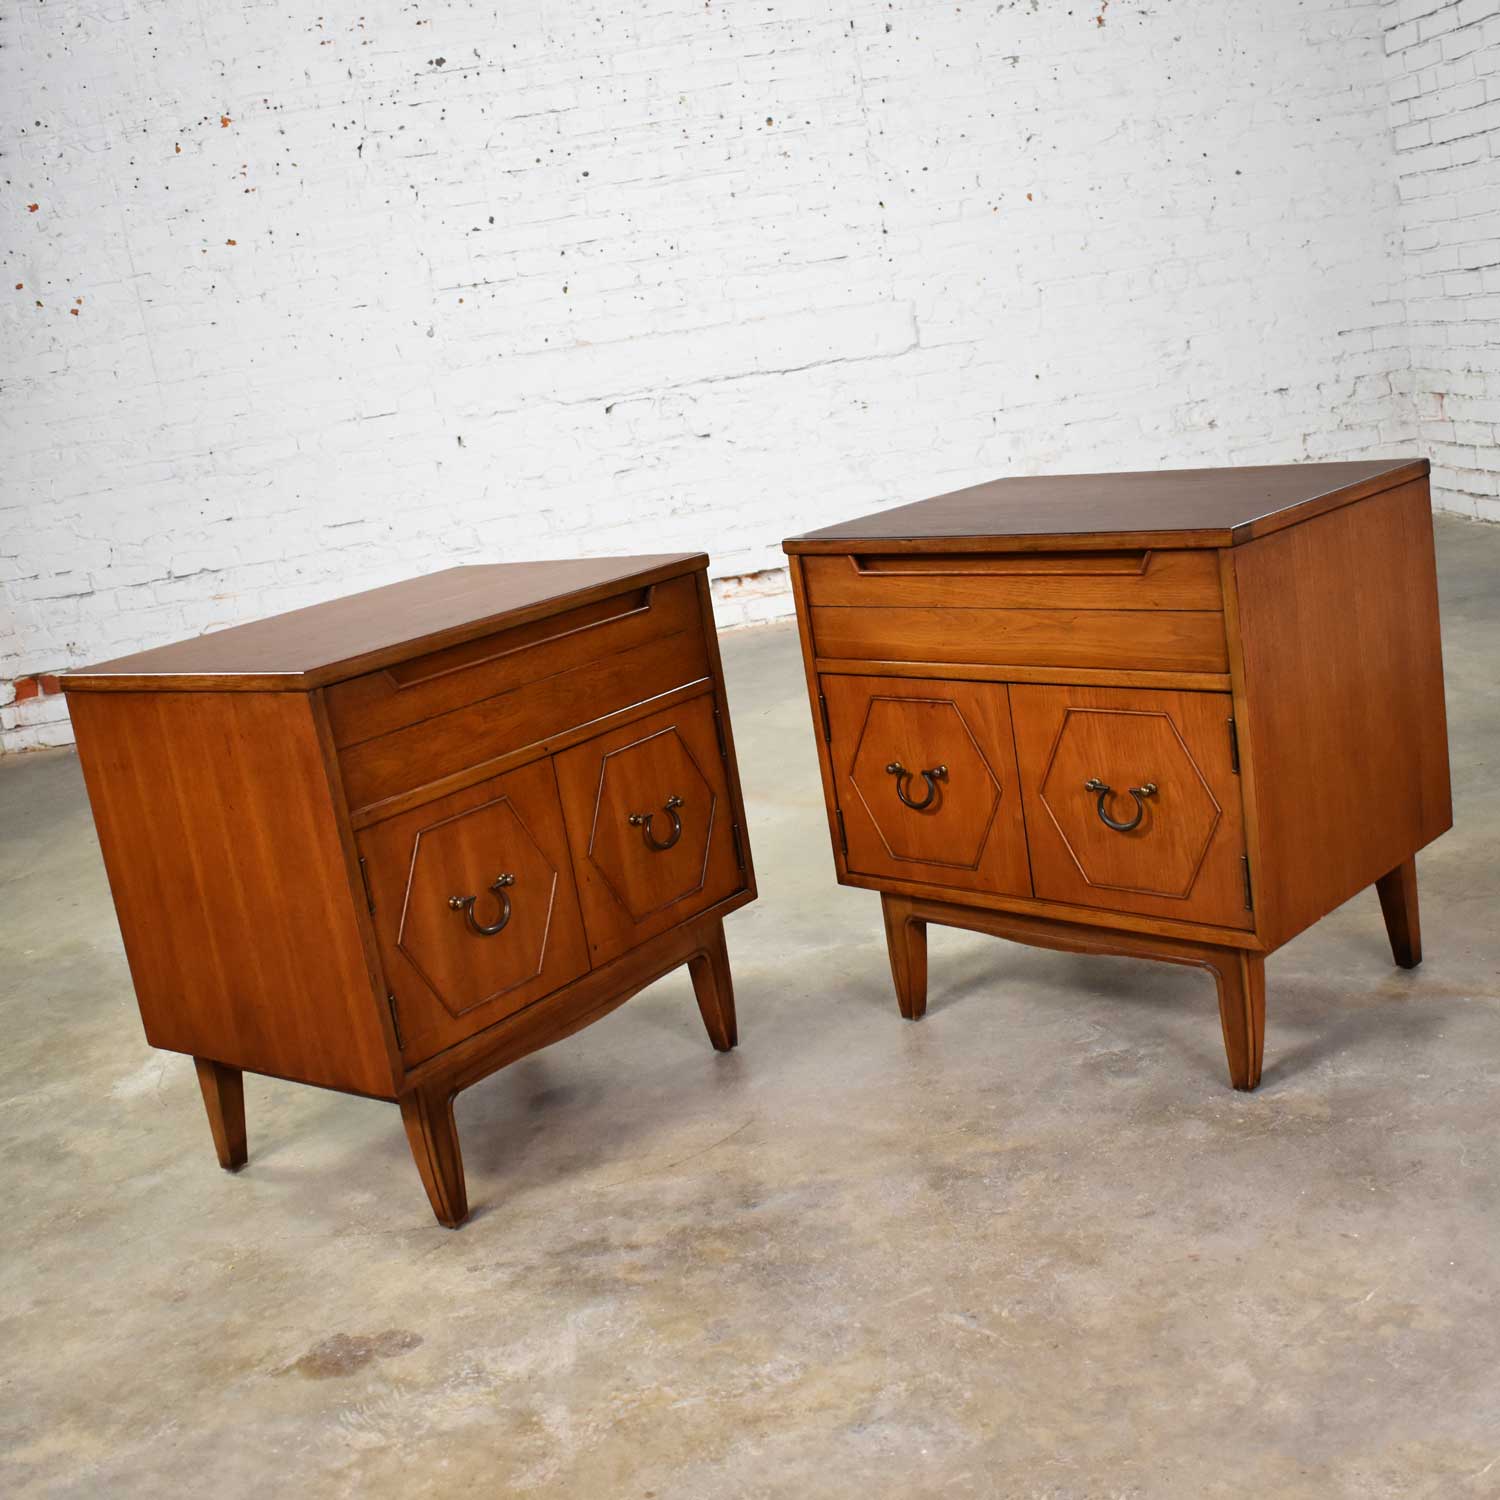 Mid Century Pair of Nightstands or End Tables with Hexagon Paneled Design and Brass Hardware